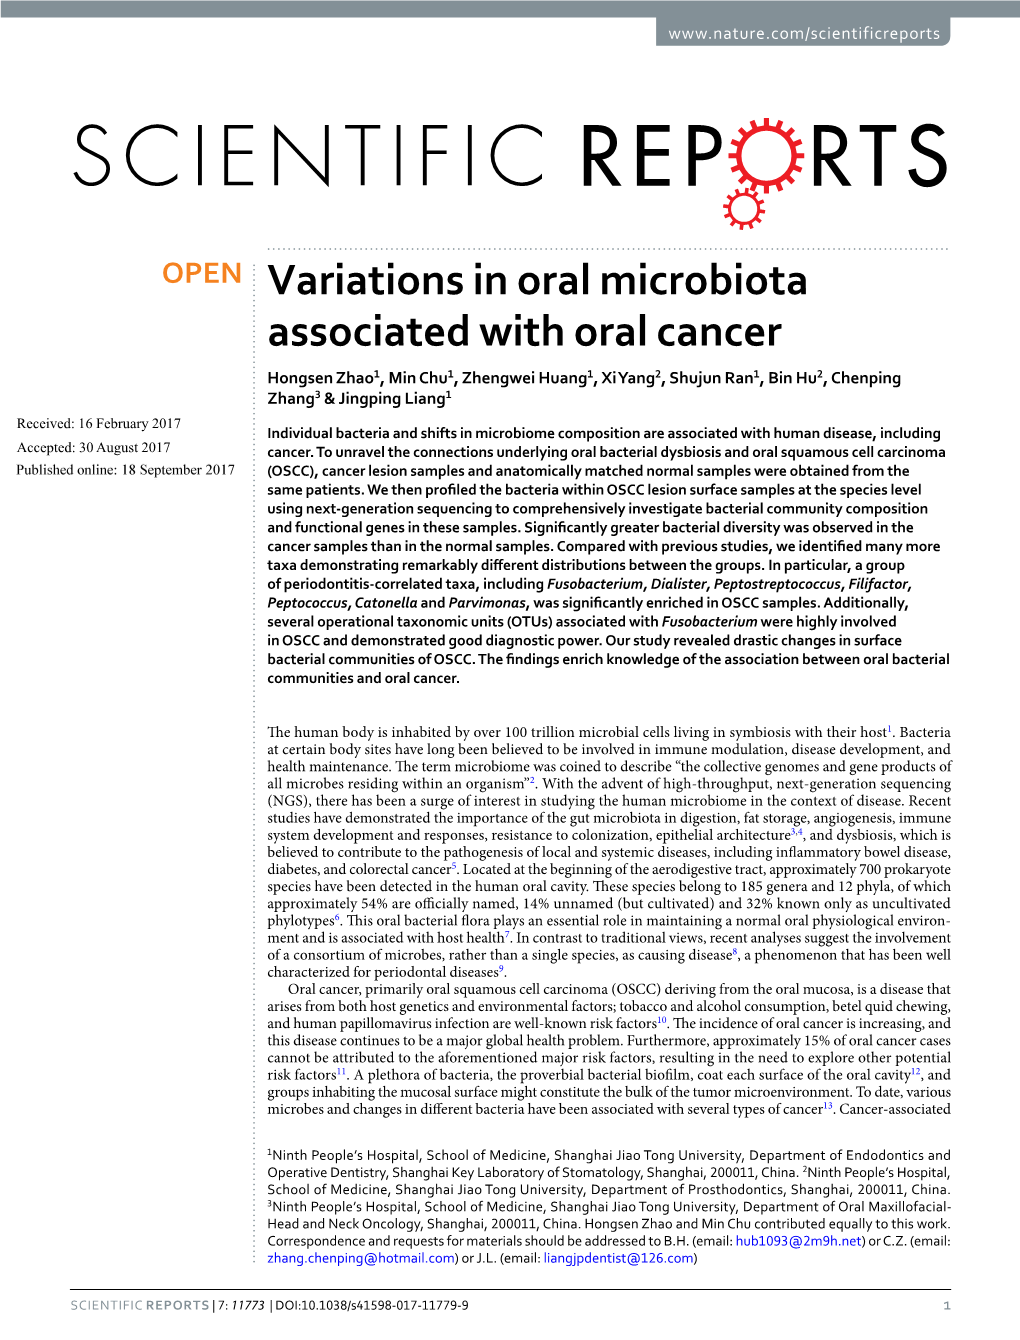 Variations in Oral Microbiota Associated with Oral Cancer